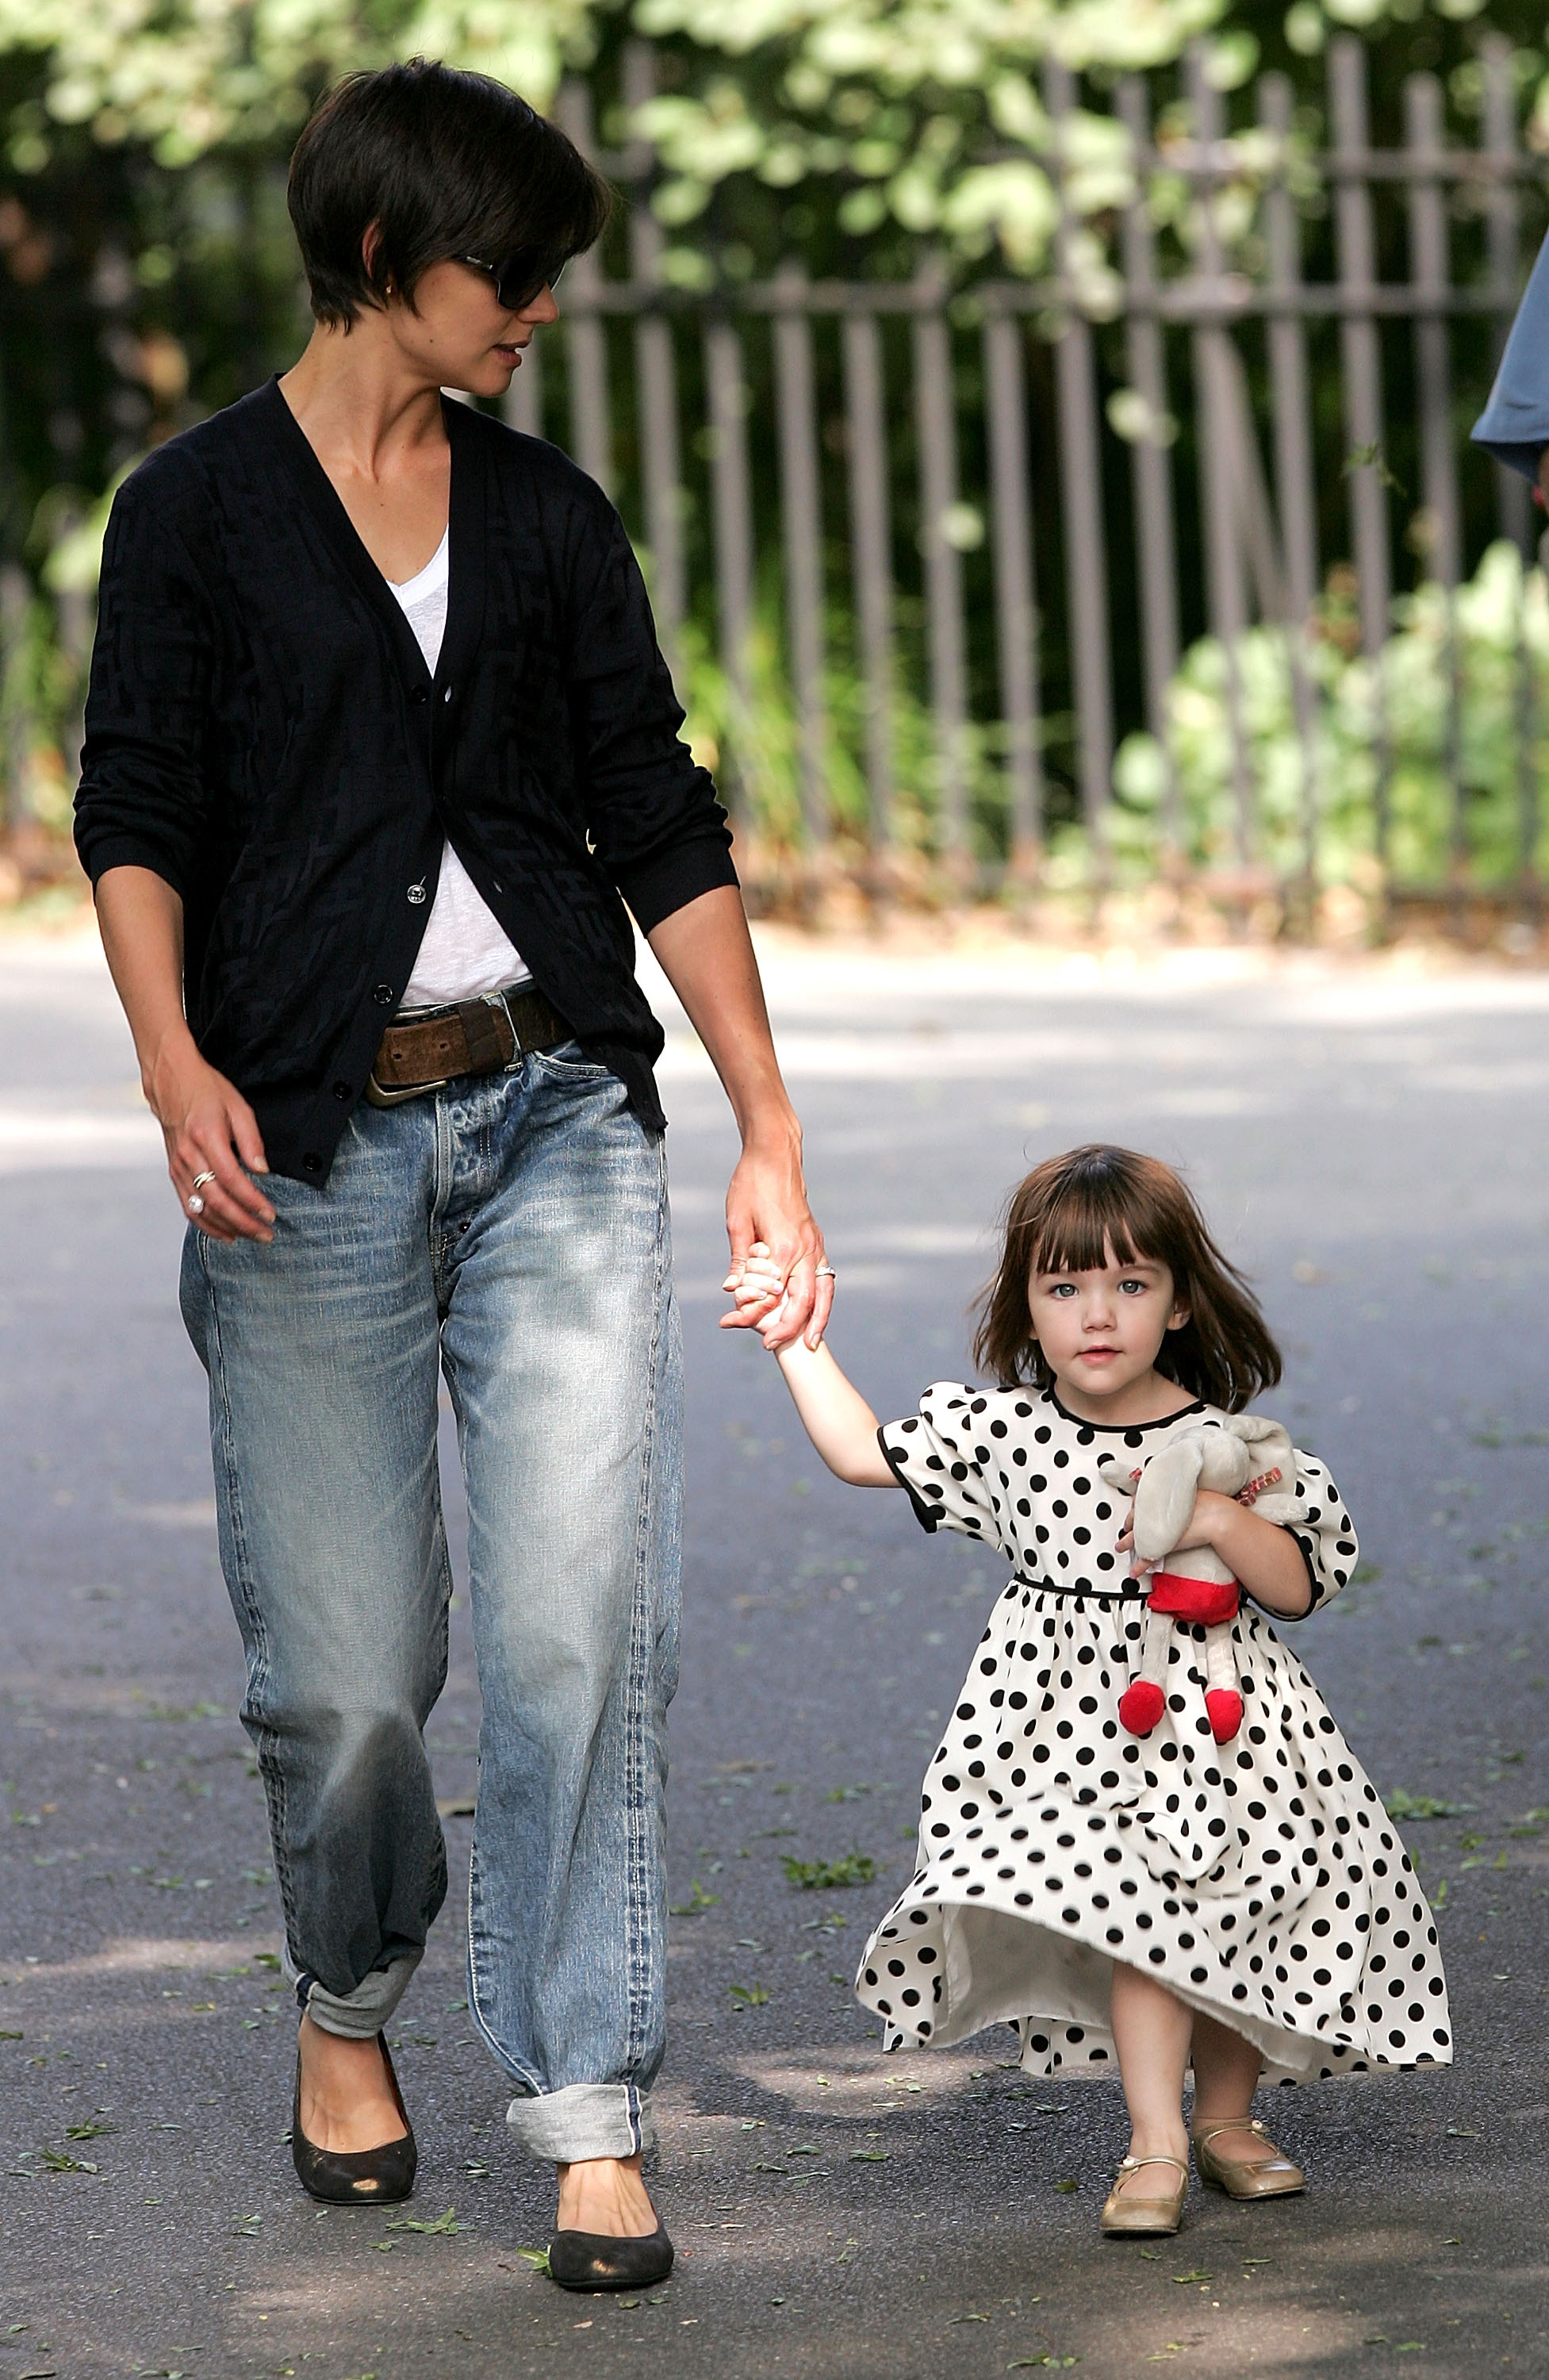 Katie Holmes and Suri Cruise seen on the streets of Manhattan on August 7, 2008 in New York City. | Source: Getty Images